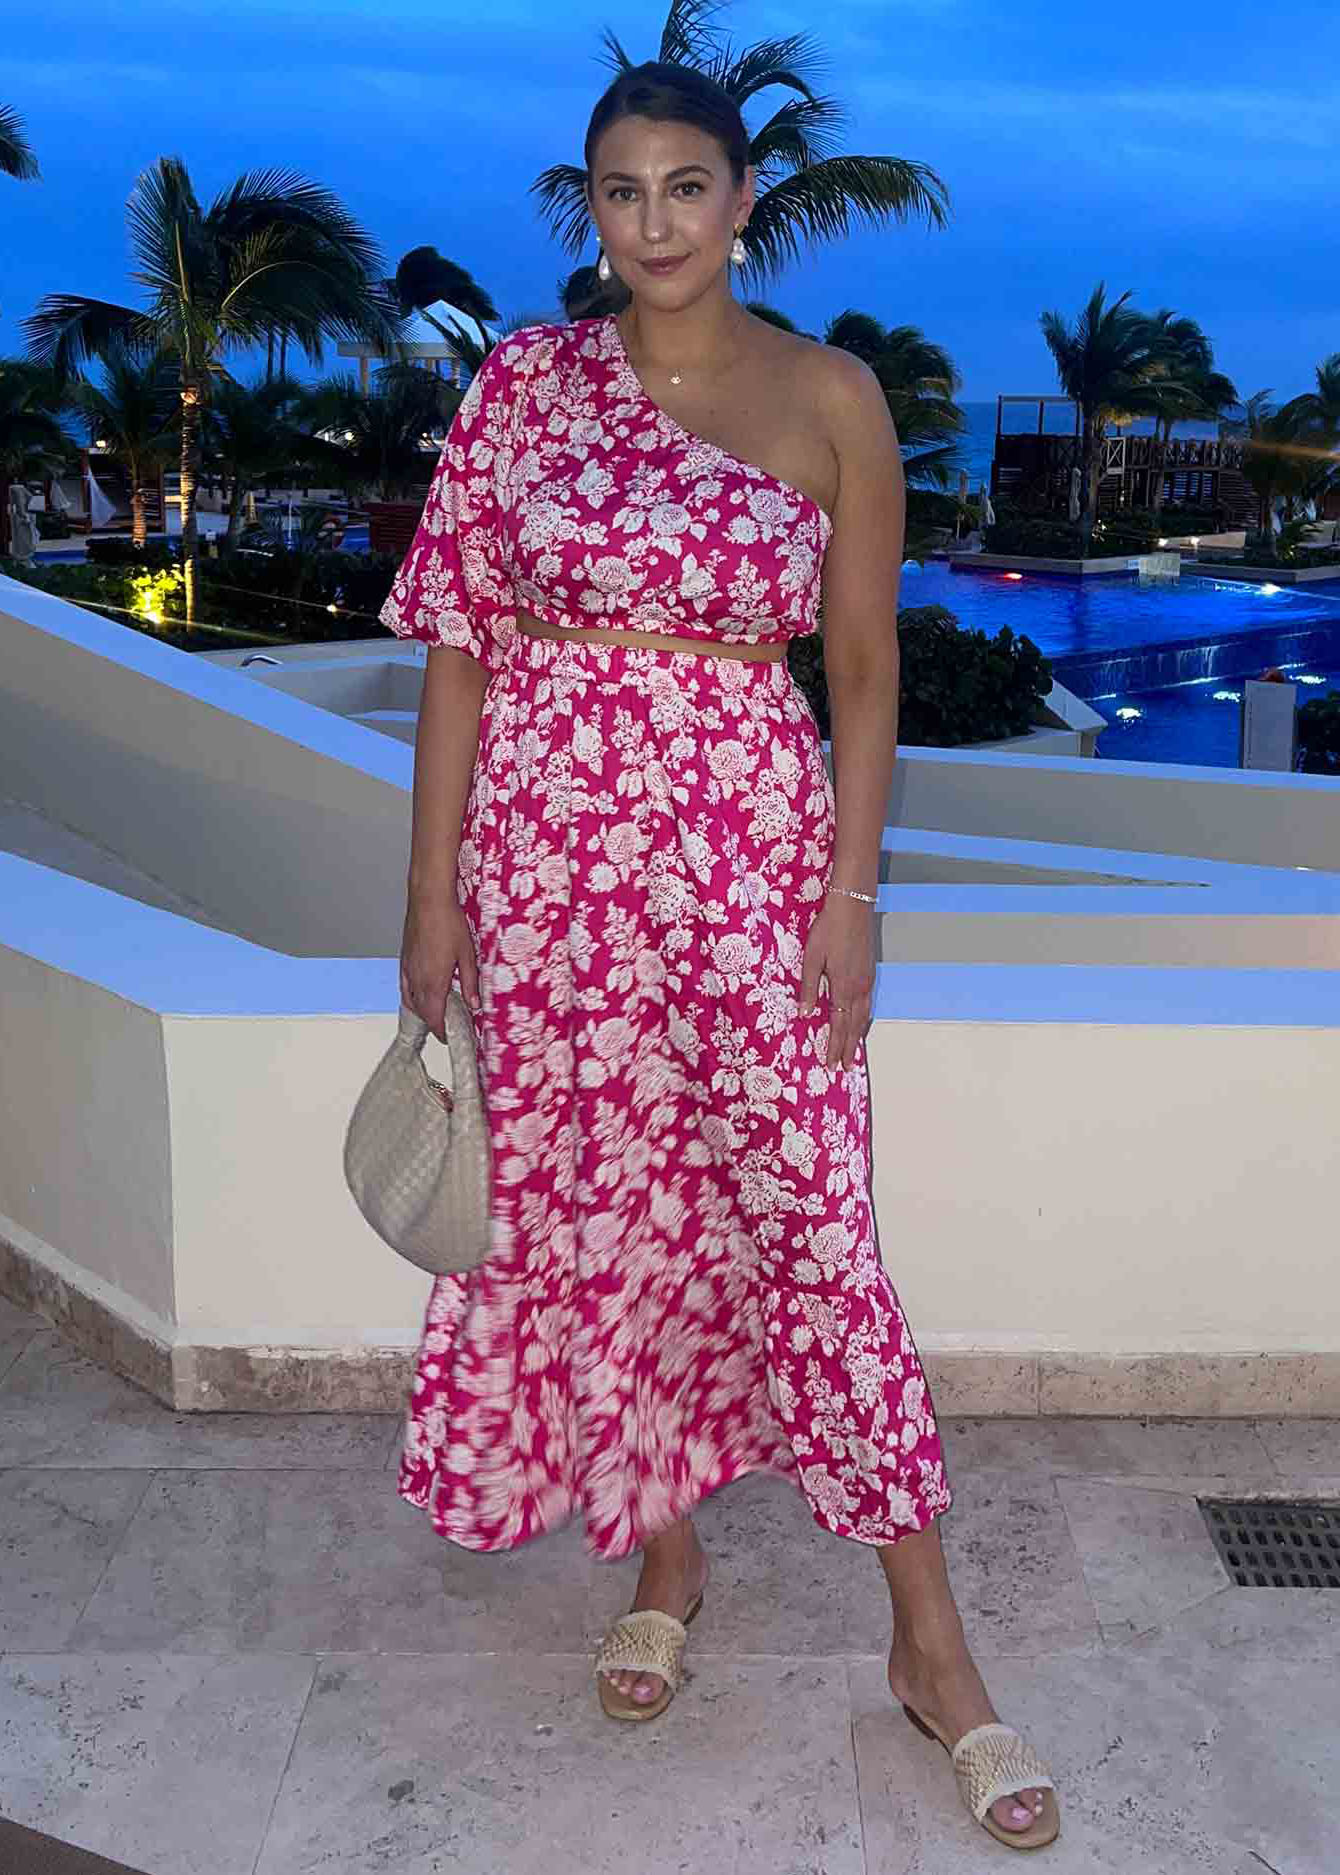 What to wear to Dinner in Cancun